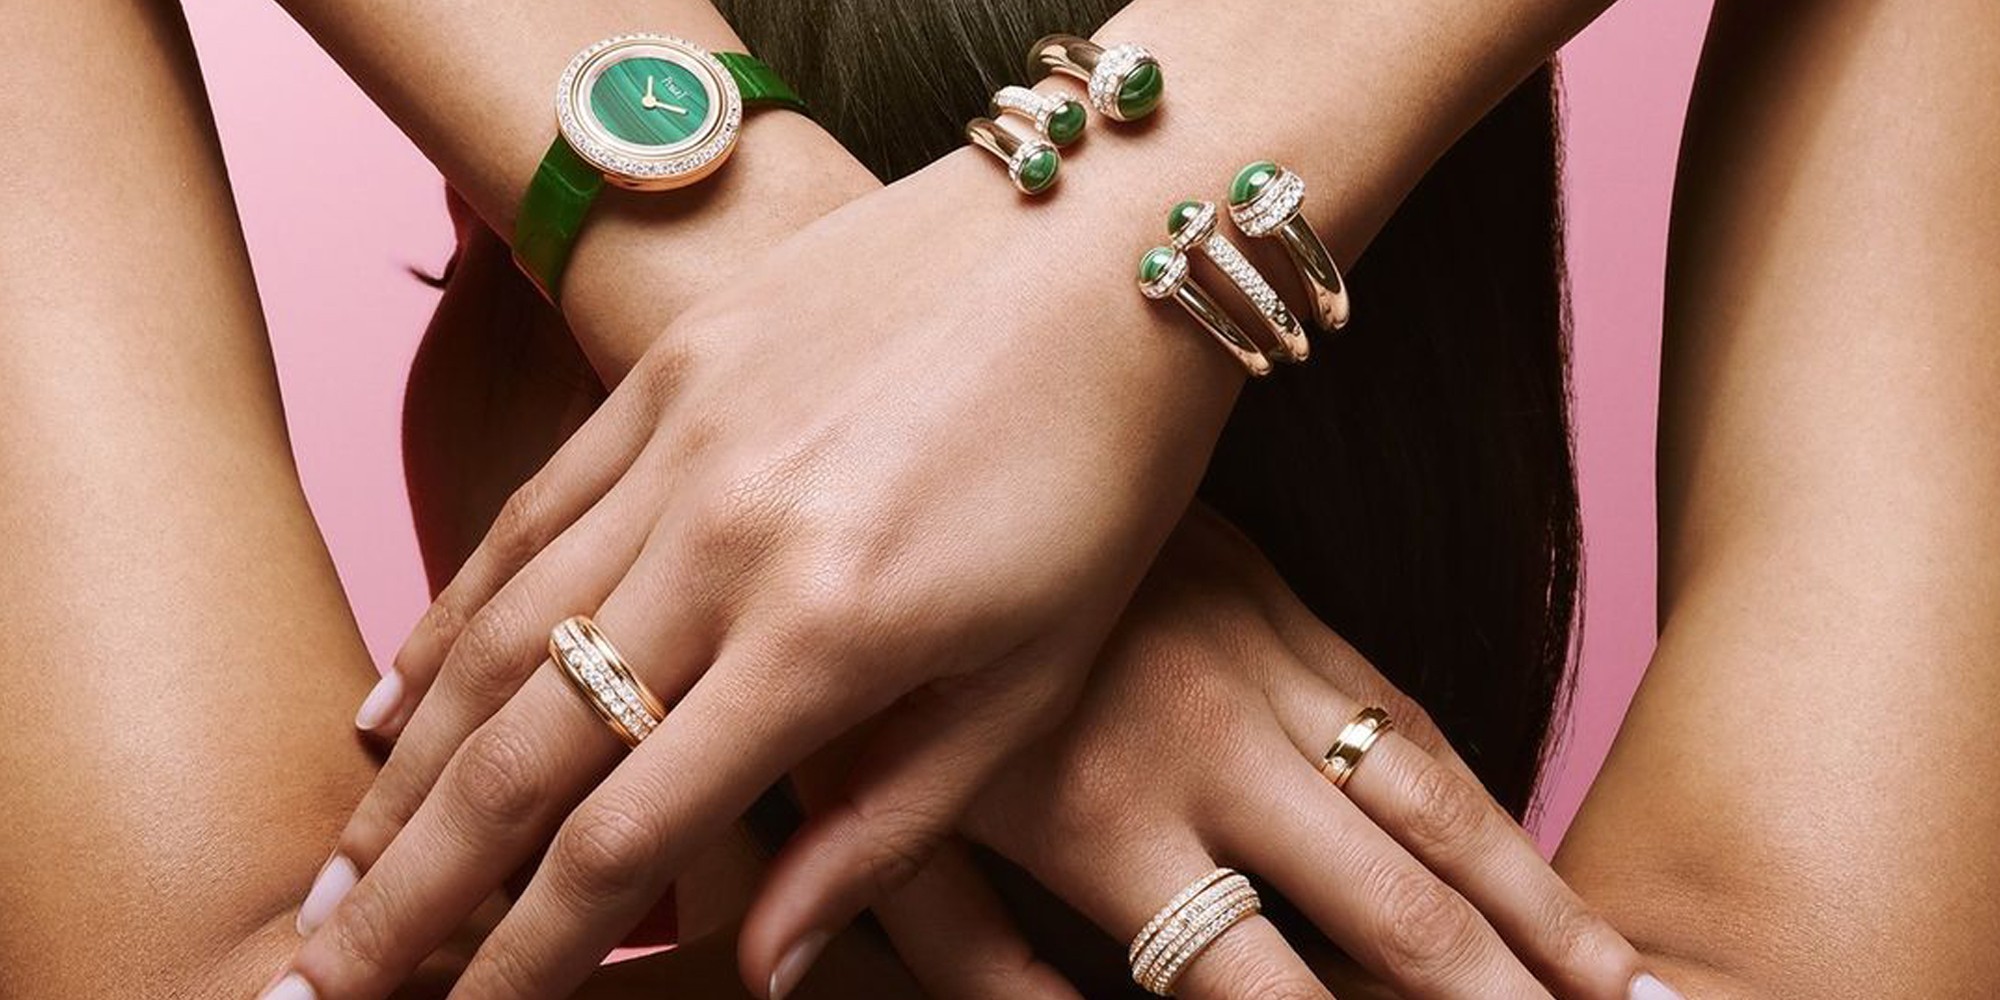 SHOP THE PIAGET 2021 POSSESSION JEWELRY COLLECTION